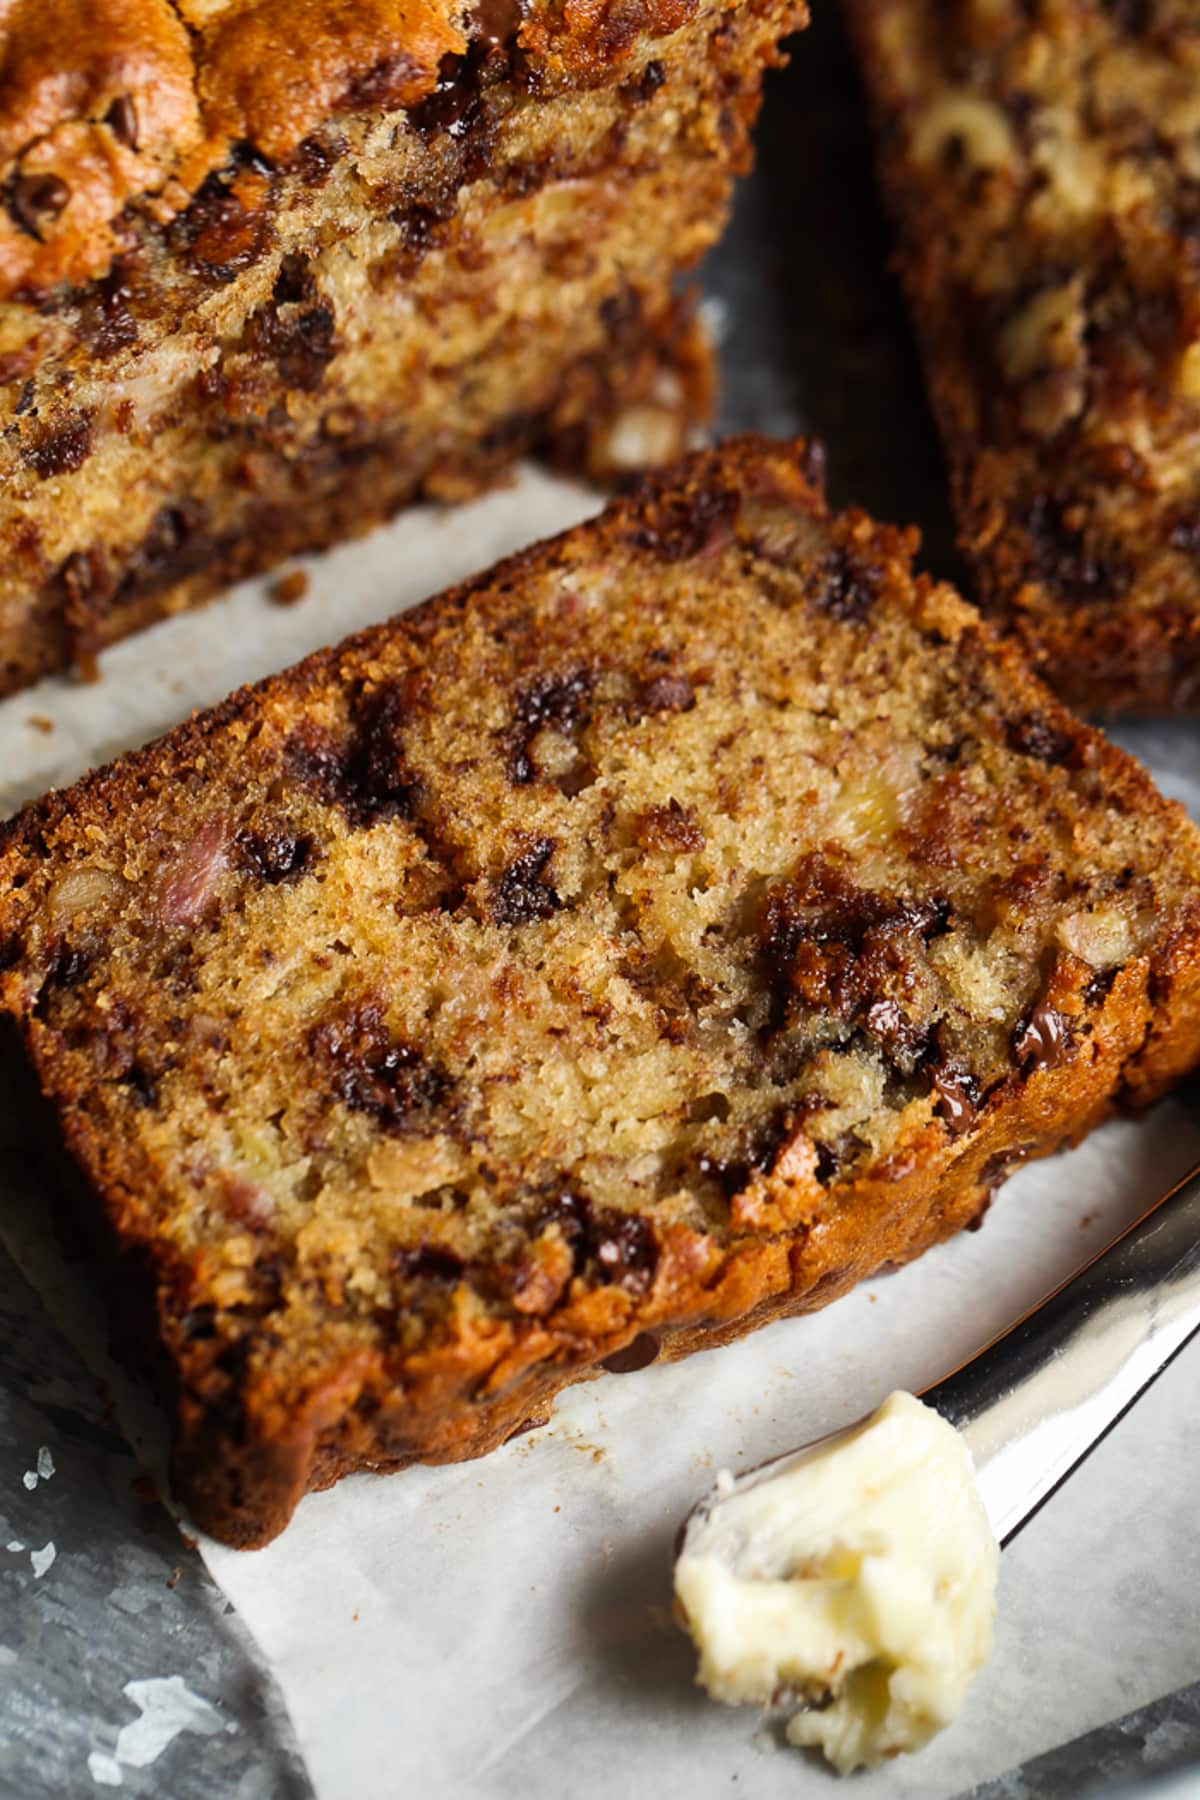 A slice of banana bread with chocolate chips and walnuts on a platter with a butter knife